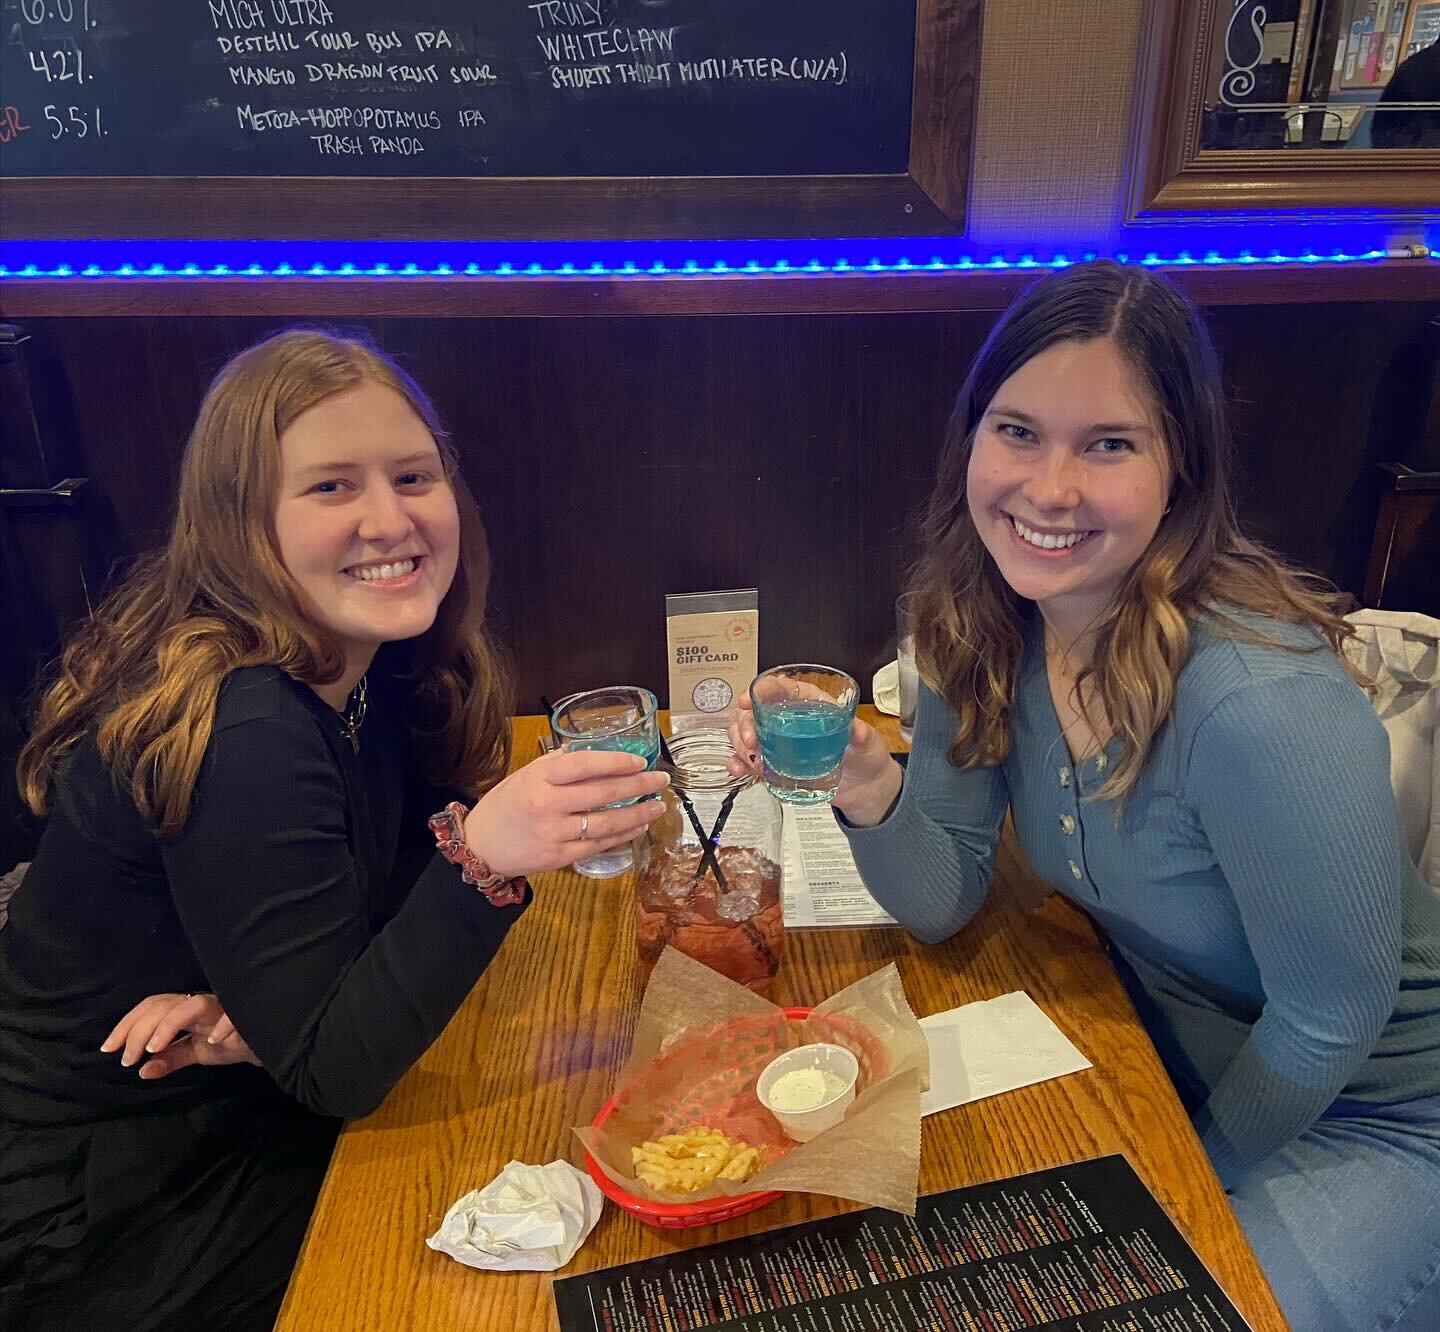 Thank you to Abby for the name of this week&rsquo;s shooter special! @abbshack 

$4 - &ldquo;Juwan Last Shot For The Road&rdquo;
Rum, Peach Schnapps, Island Blue Pucker

You can order this shooter anytime through Sunday!